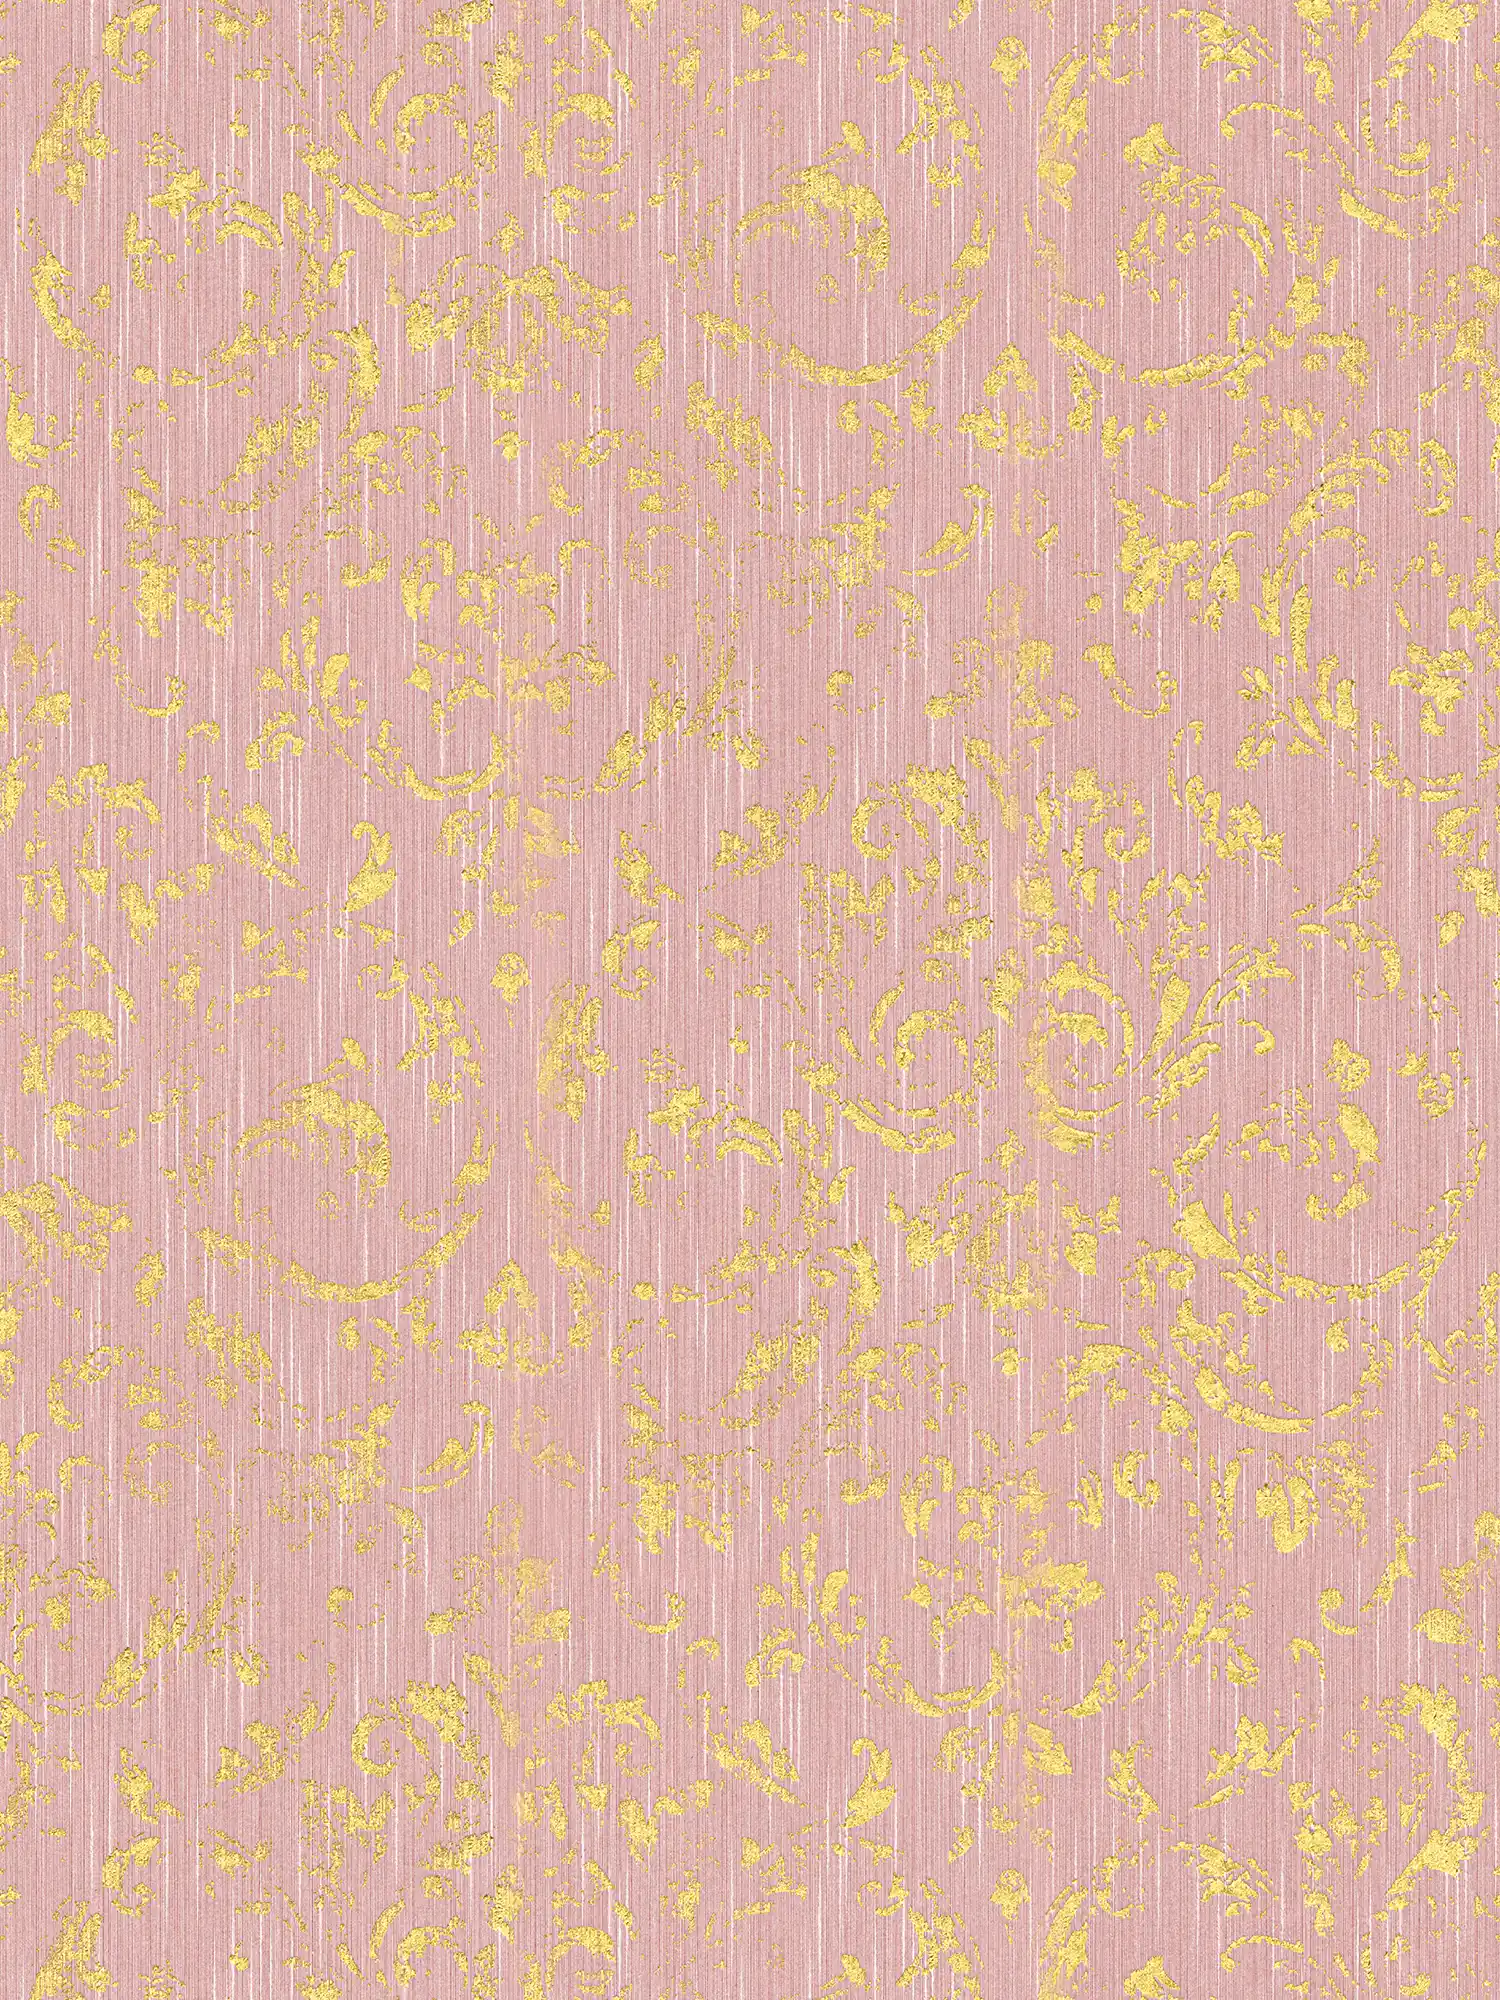 Wallpaper with gold ornaments in used look - pink, gold
